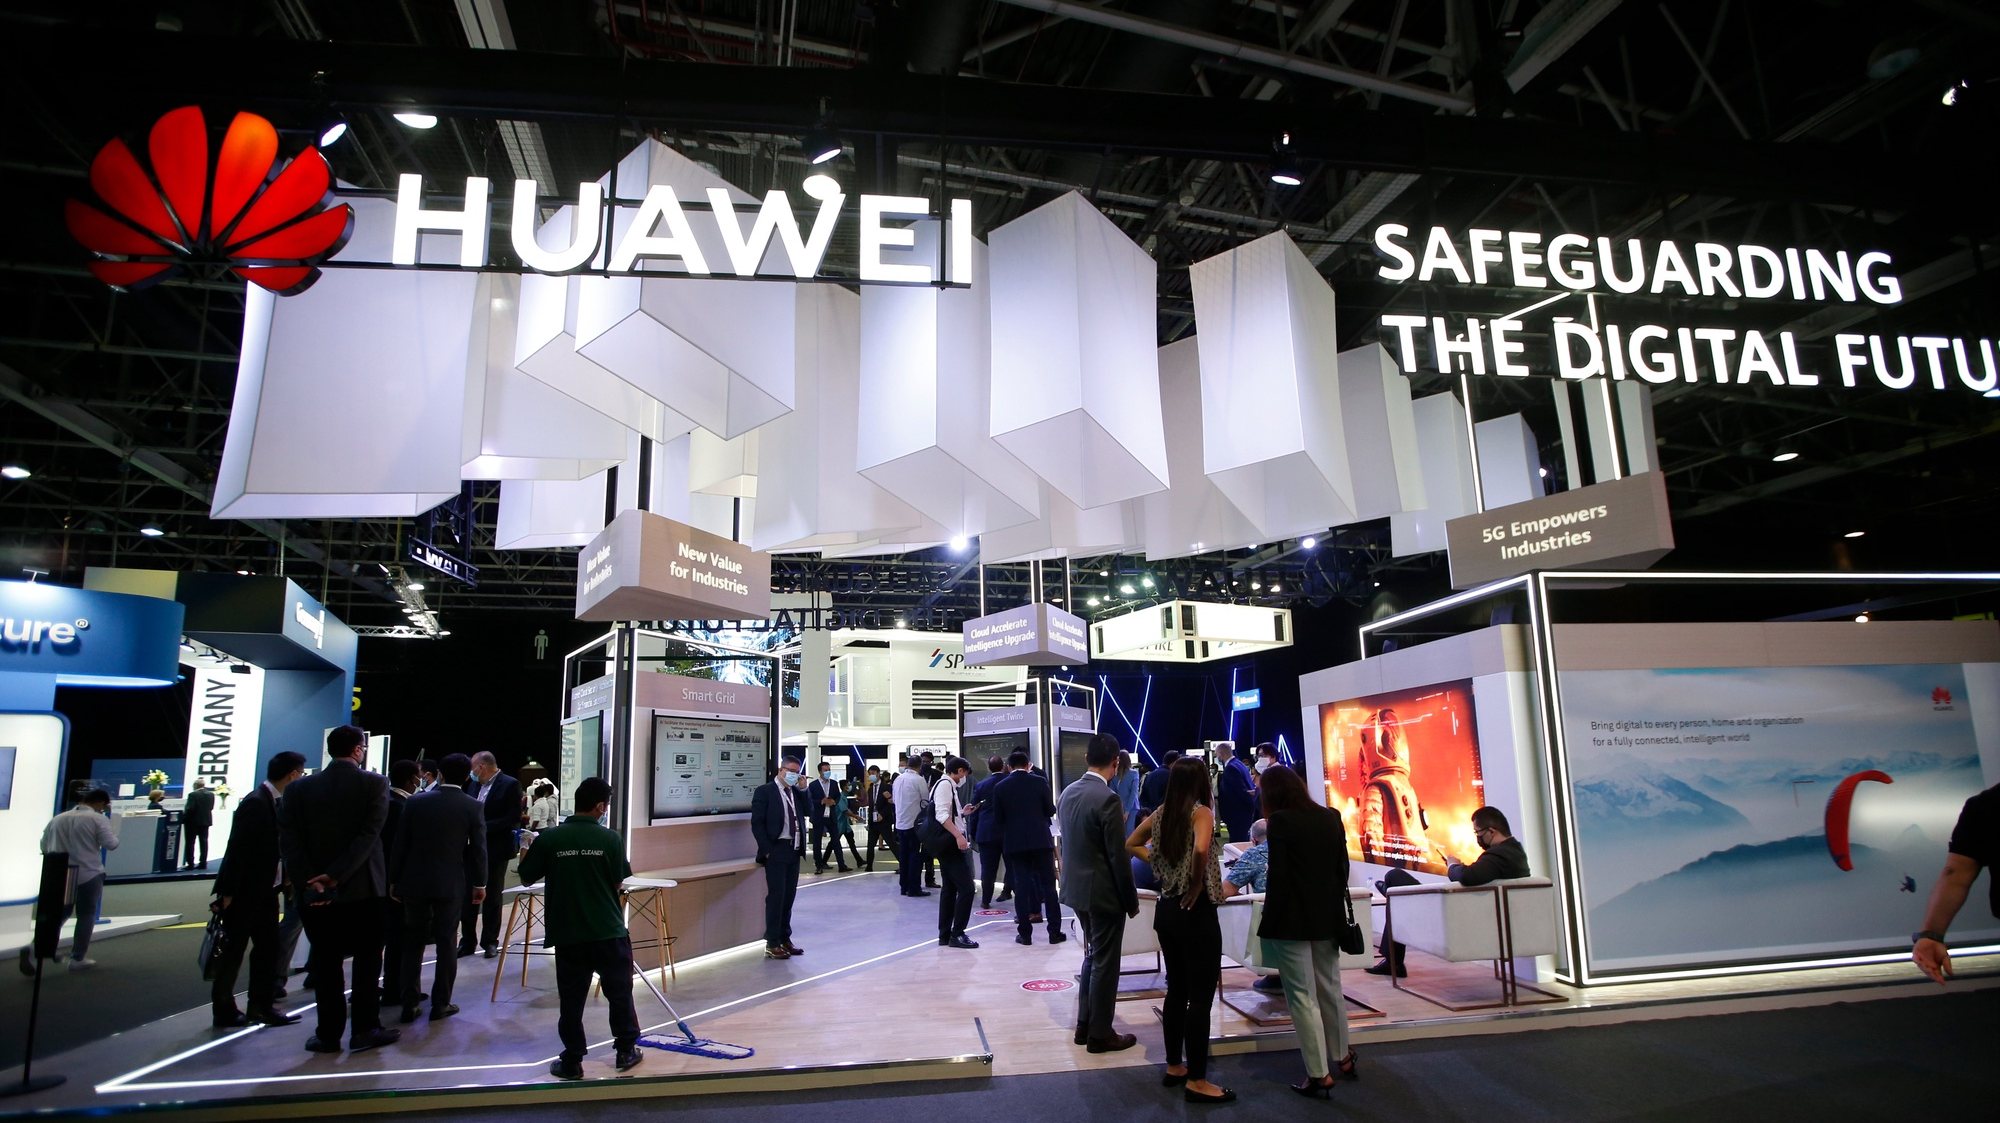 epa09238970 Visitors inspect Huawei section at the exhibition of the Gulf Information Security Expo &amp; Conference (GISEC) in the Gulf Emirate of Dubai, United Arab Emirates, 31 May 2021. The 8th edition of GISEC is running until 02 June 2021.  EPA/ALI HAIDER